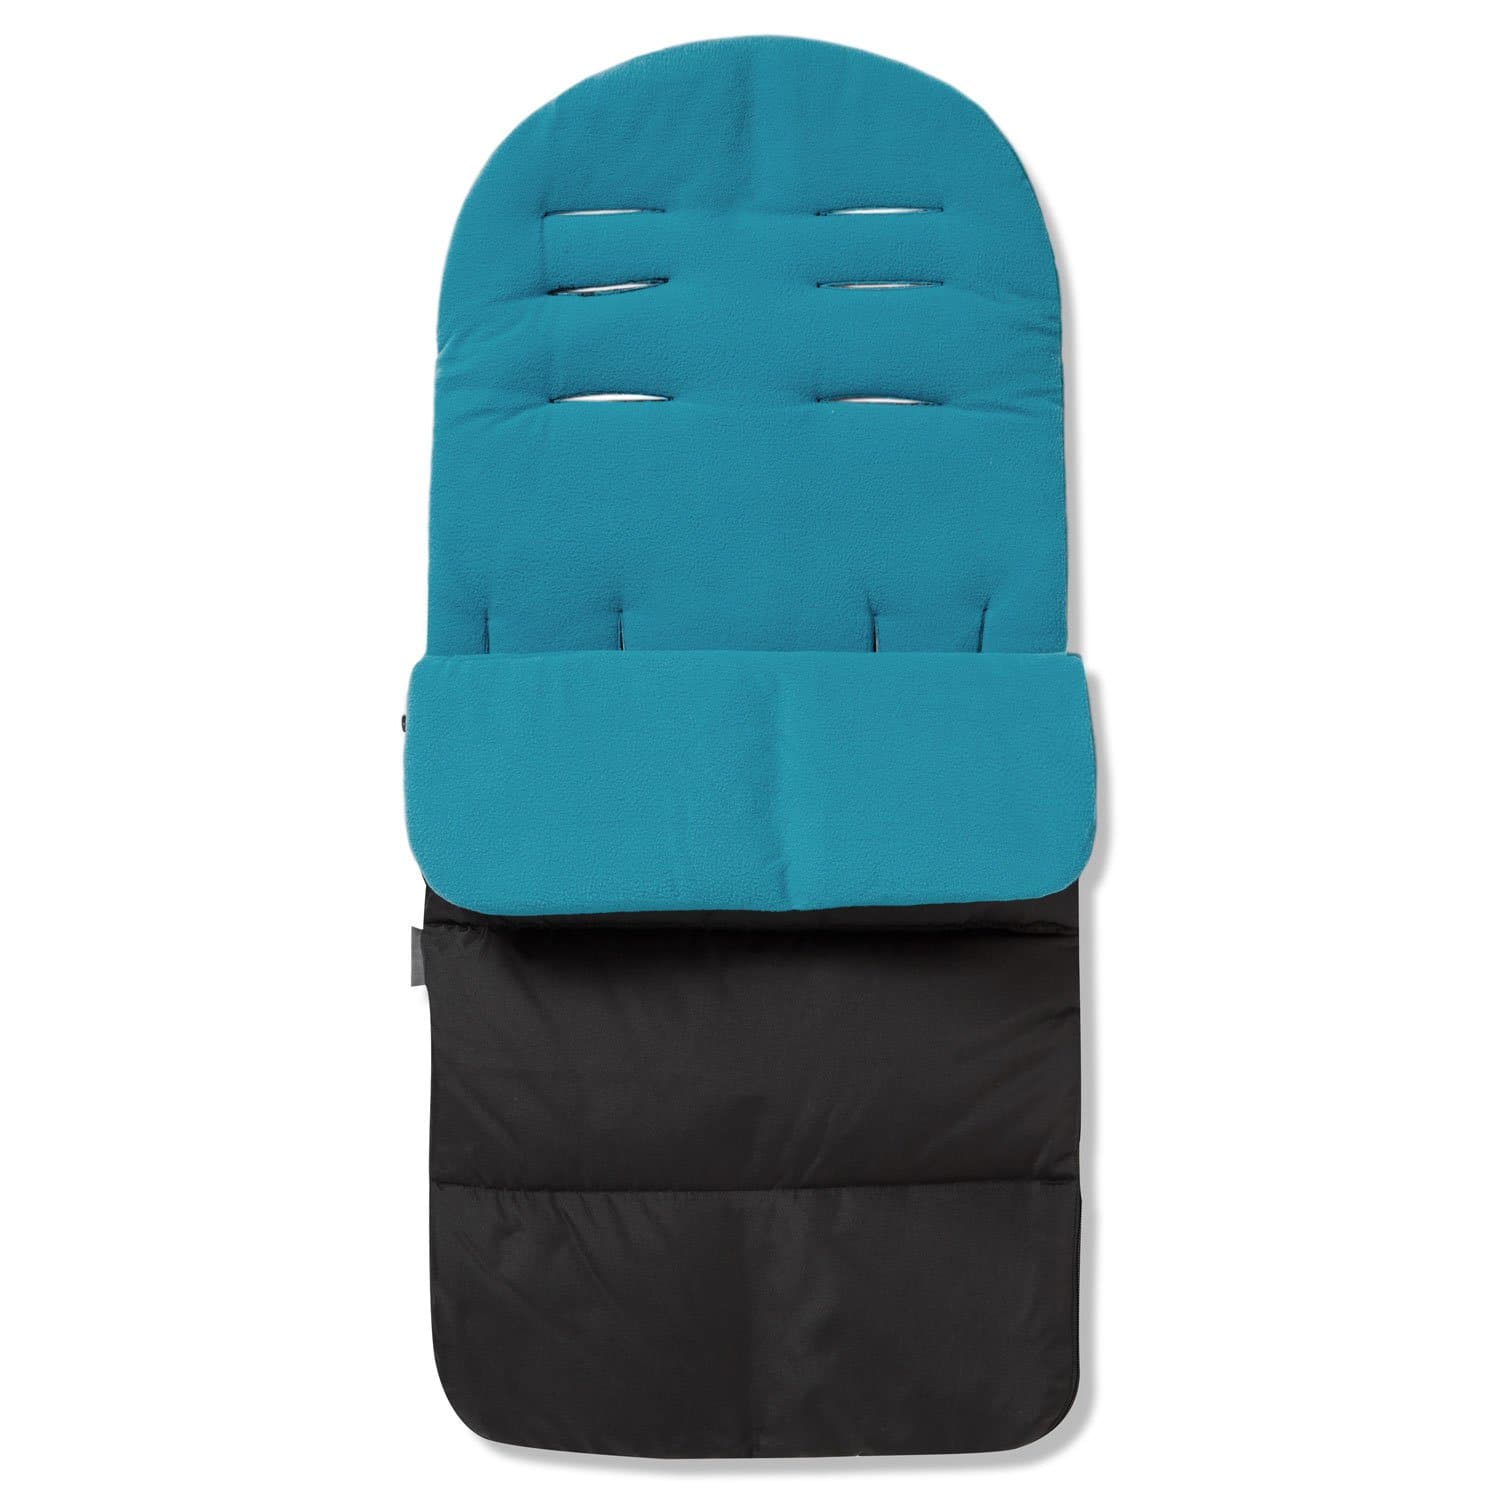 Universal Premium Pushchair Footmuff / Cosy Toes - Fits All Pushchairs / Prams And Buggies - Ocean Blue / Fits All Models | For Your Little One